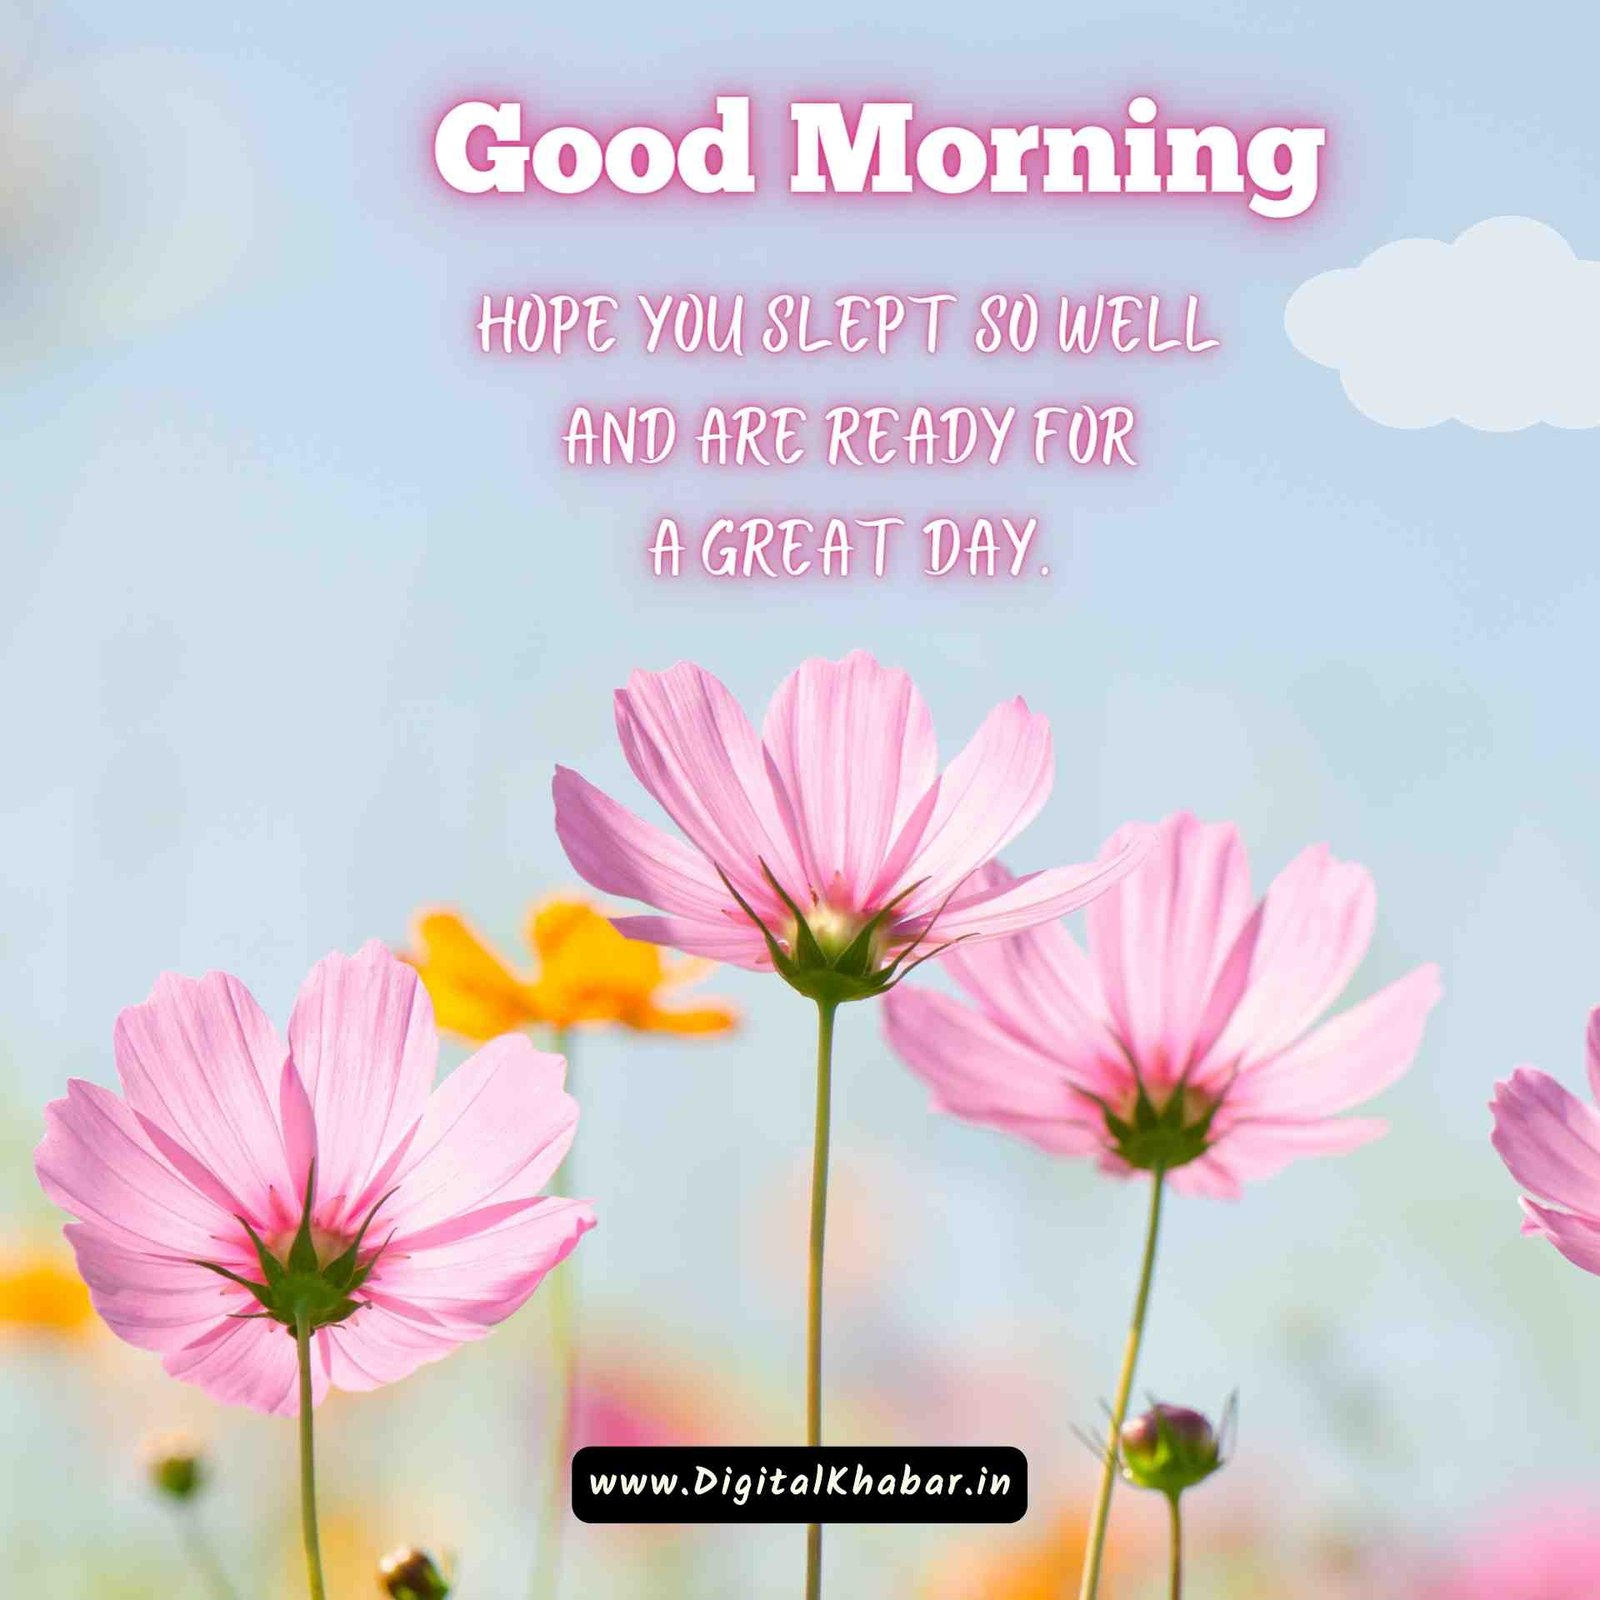 positive Good Morning Images Prayer images